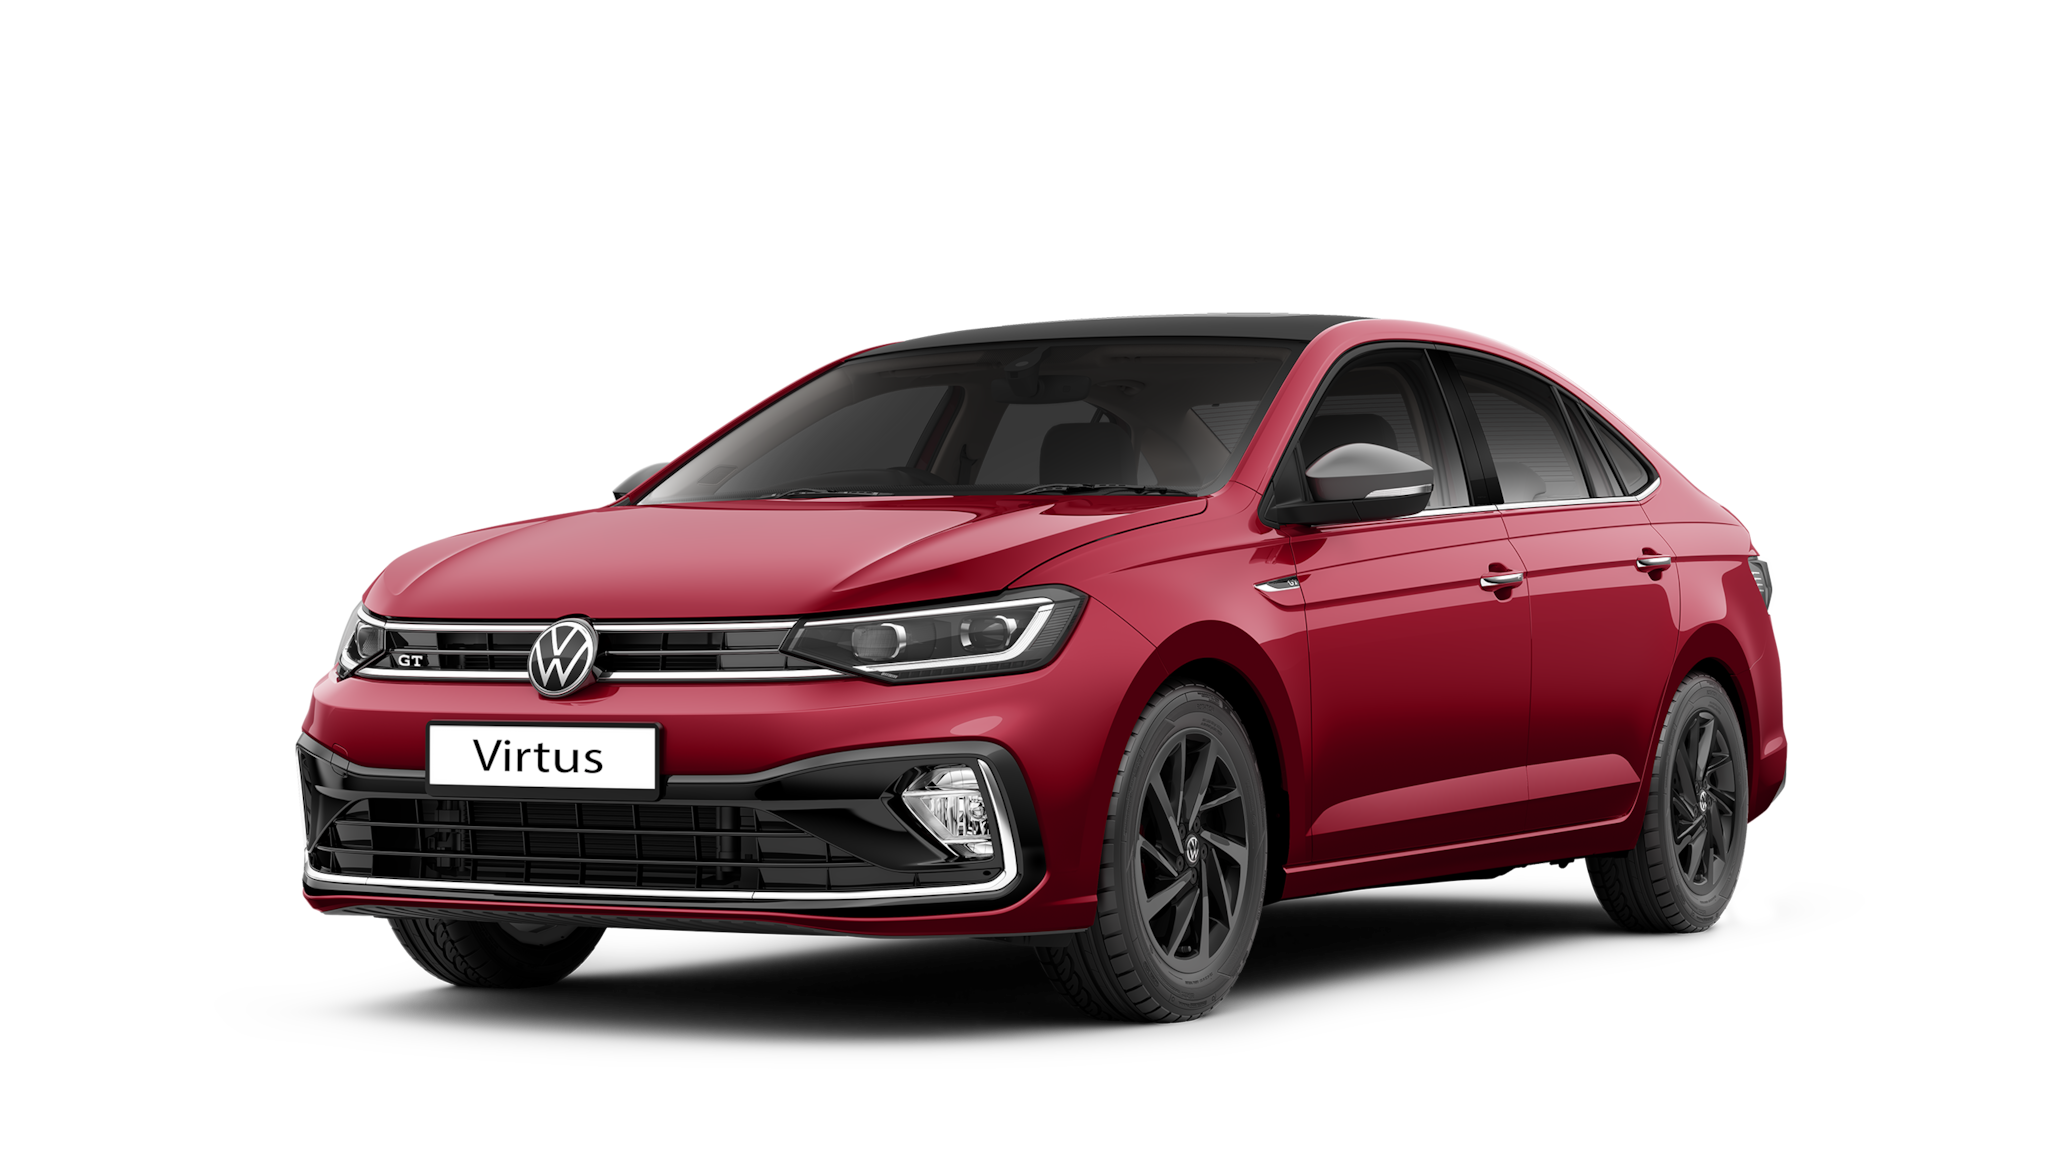 How the Volkswagen Virtus is likely to fare against the competition